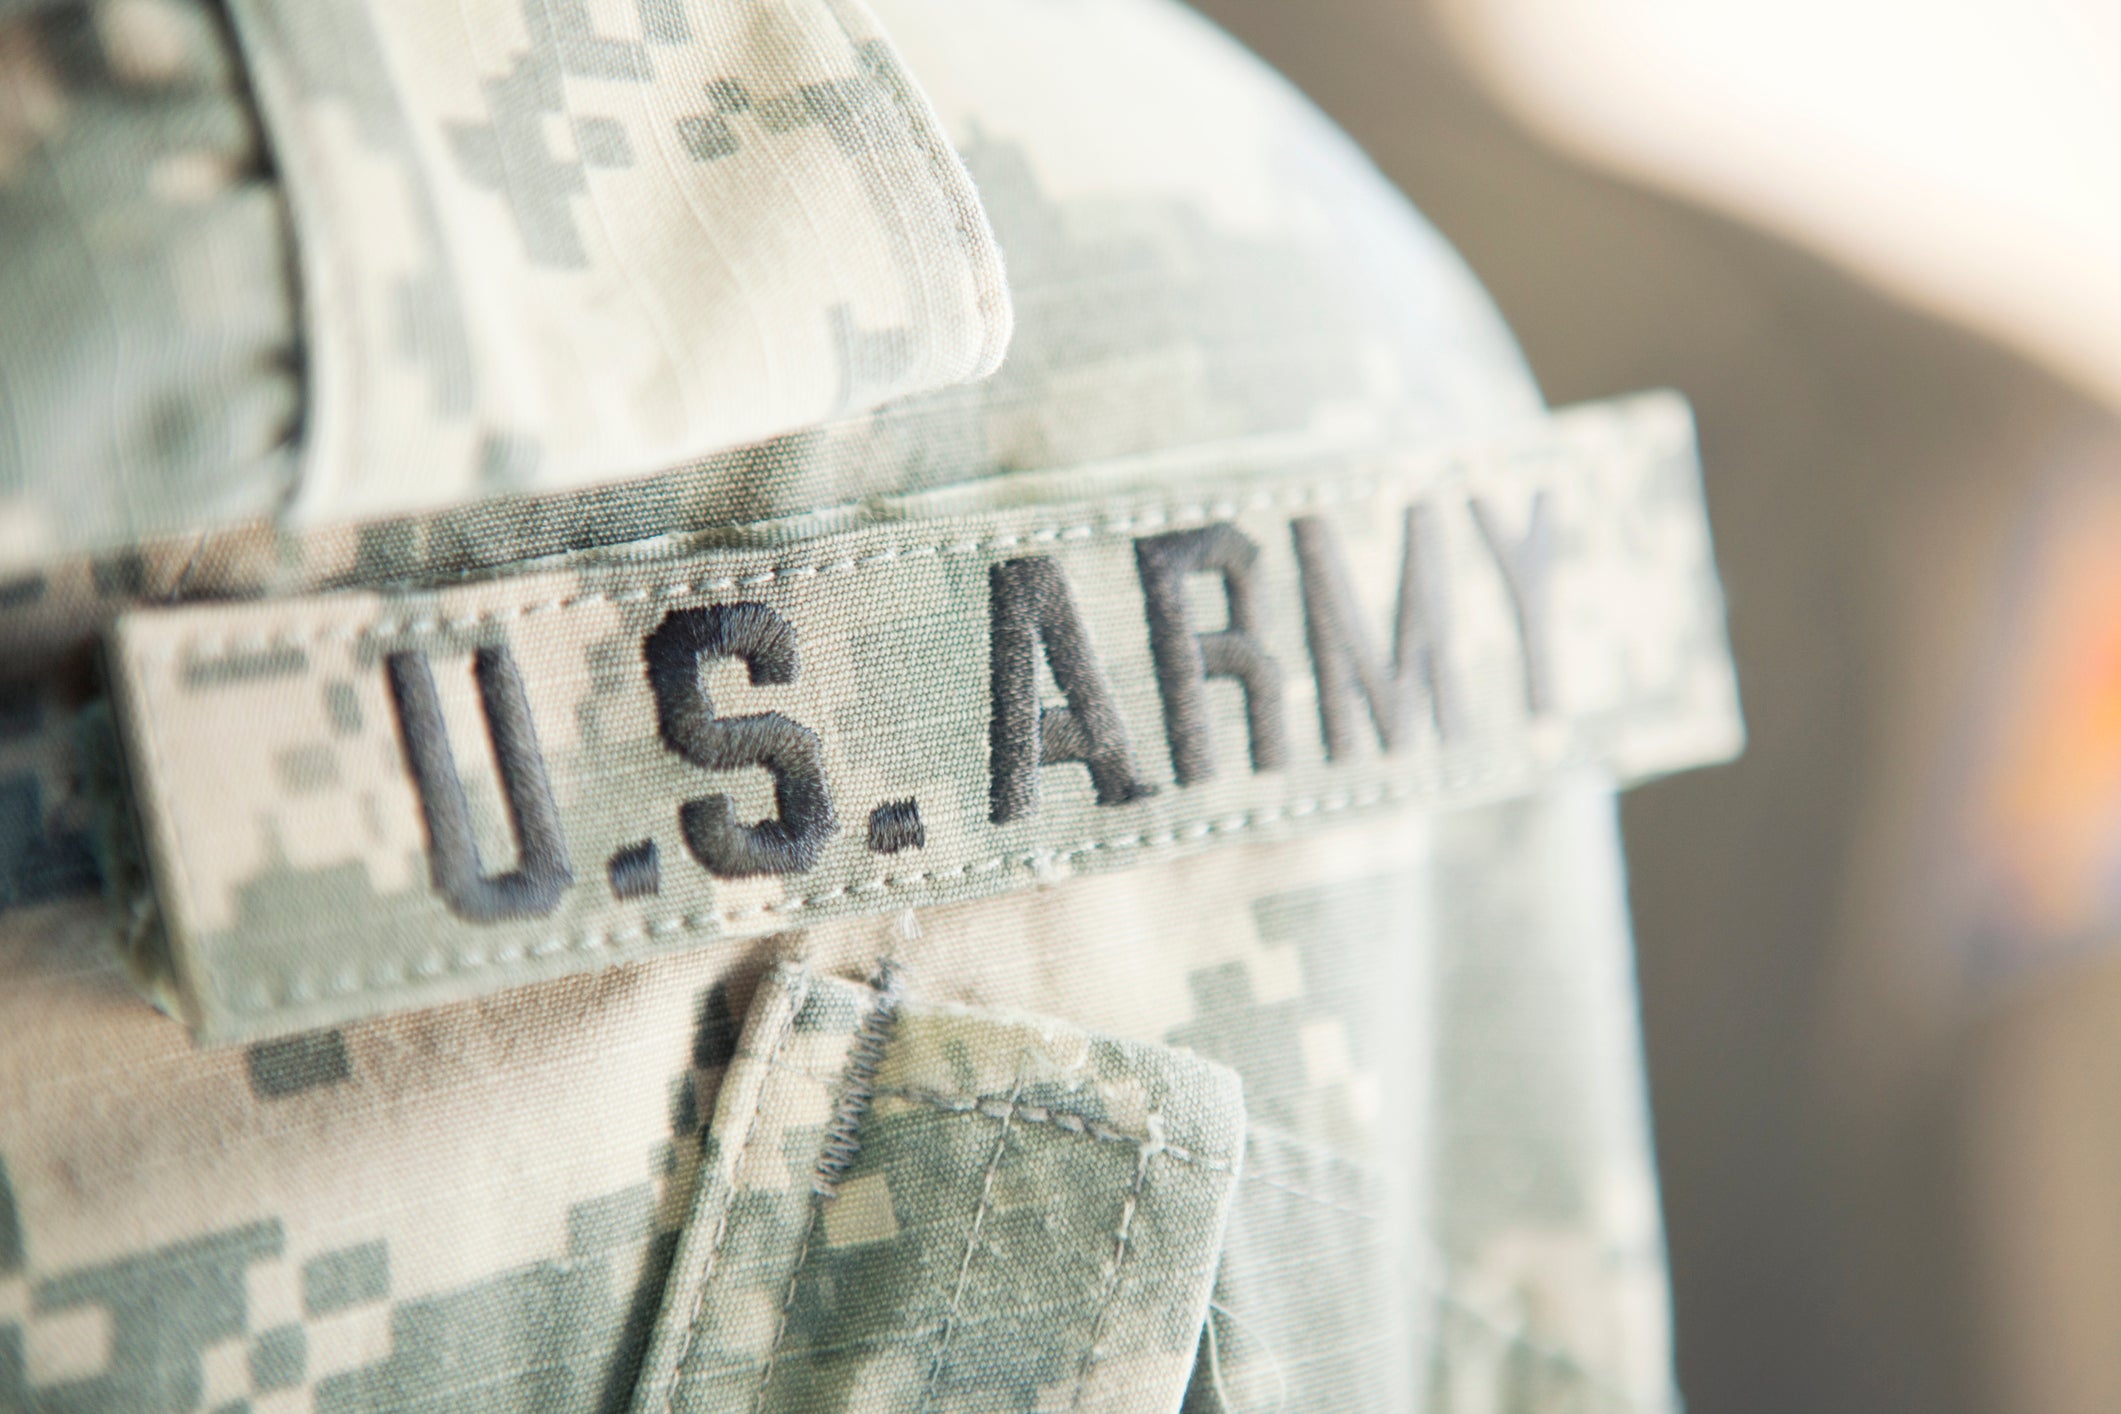 US Army charges military doctor with sexual assaulting 23 victims